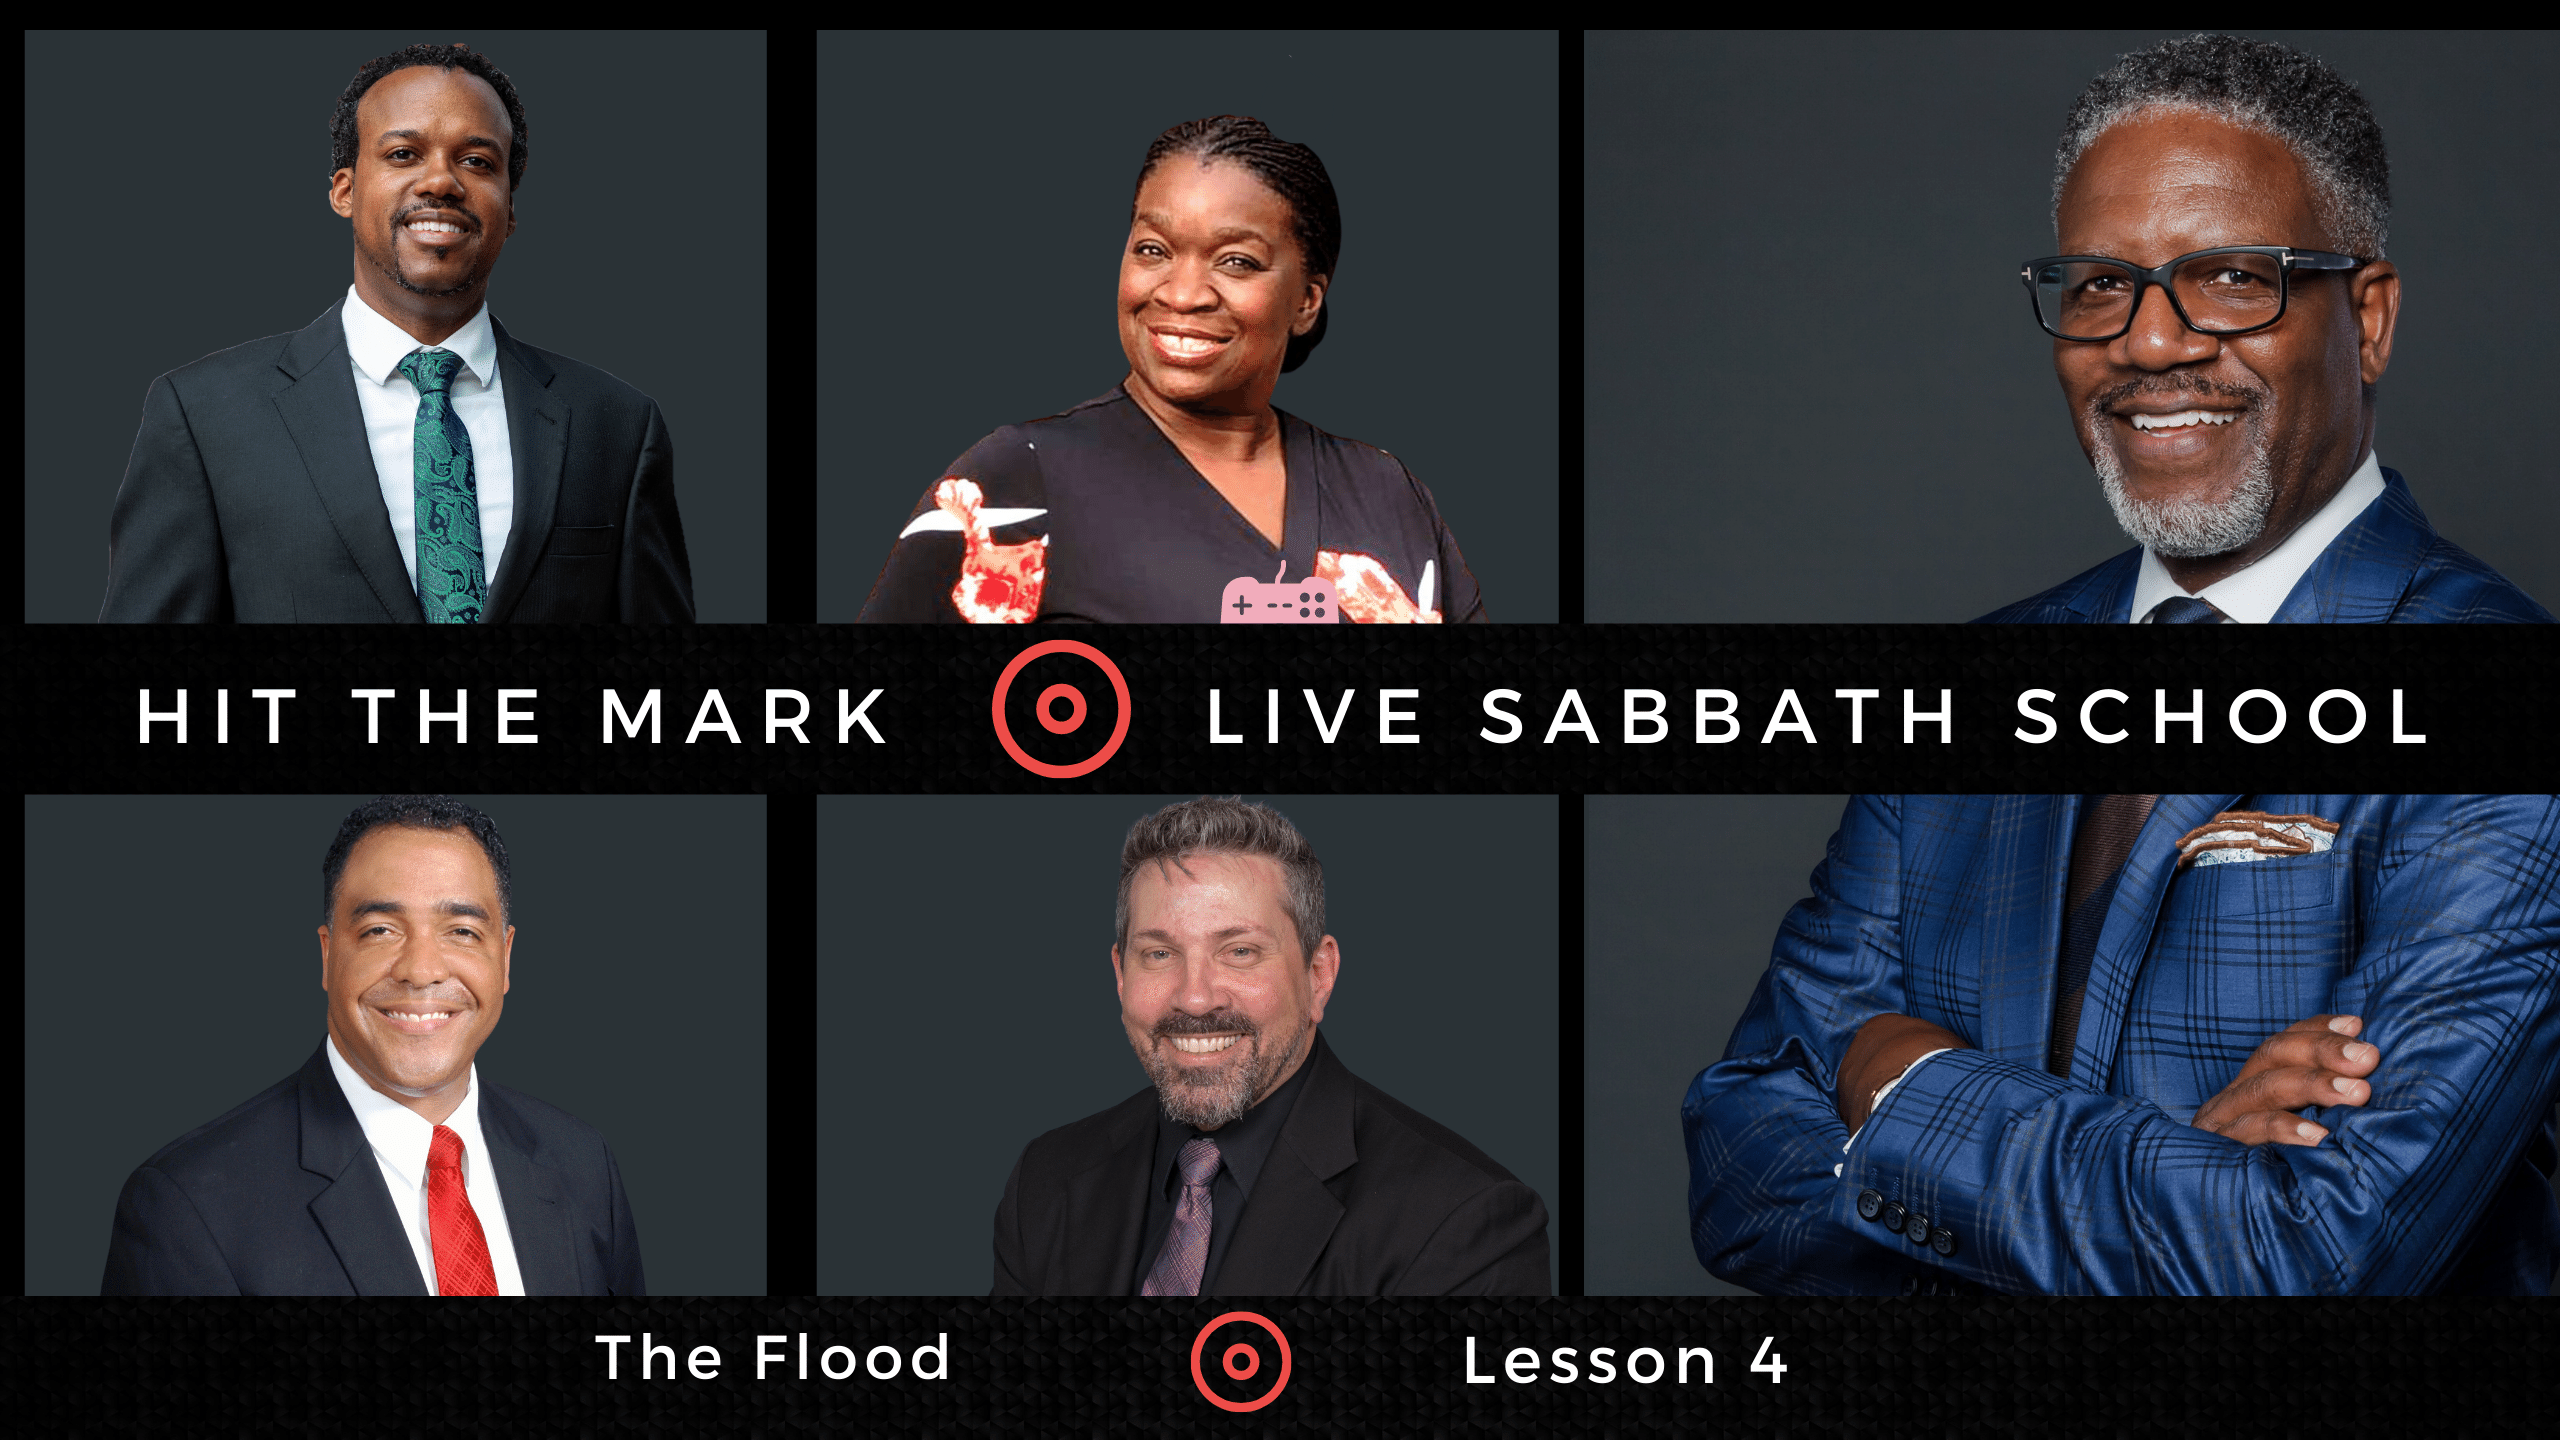 Join the Hit the Mark Panel as they discuss the week's lesson